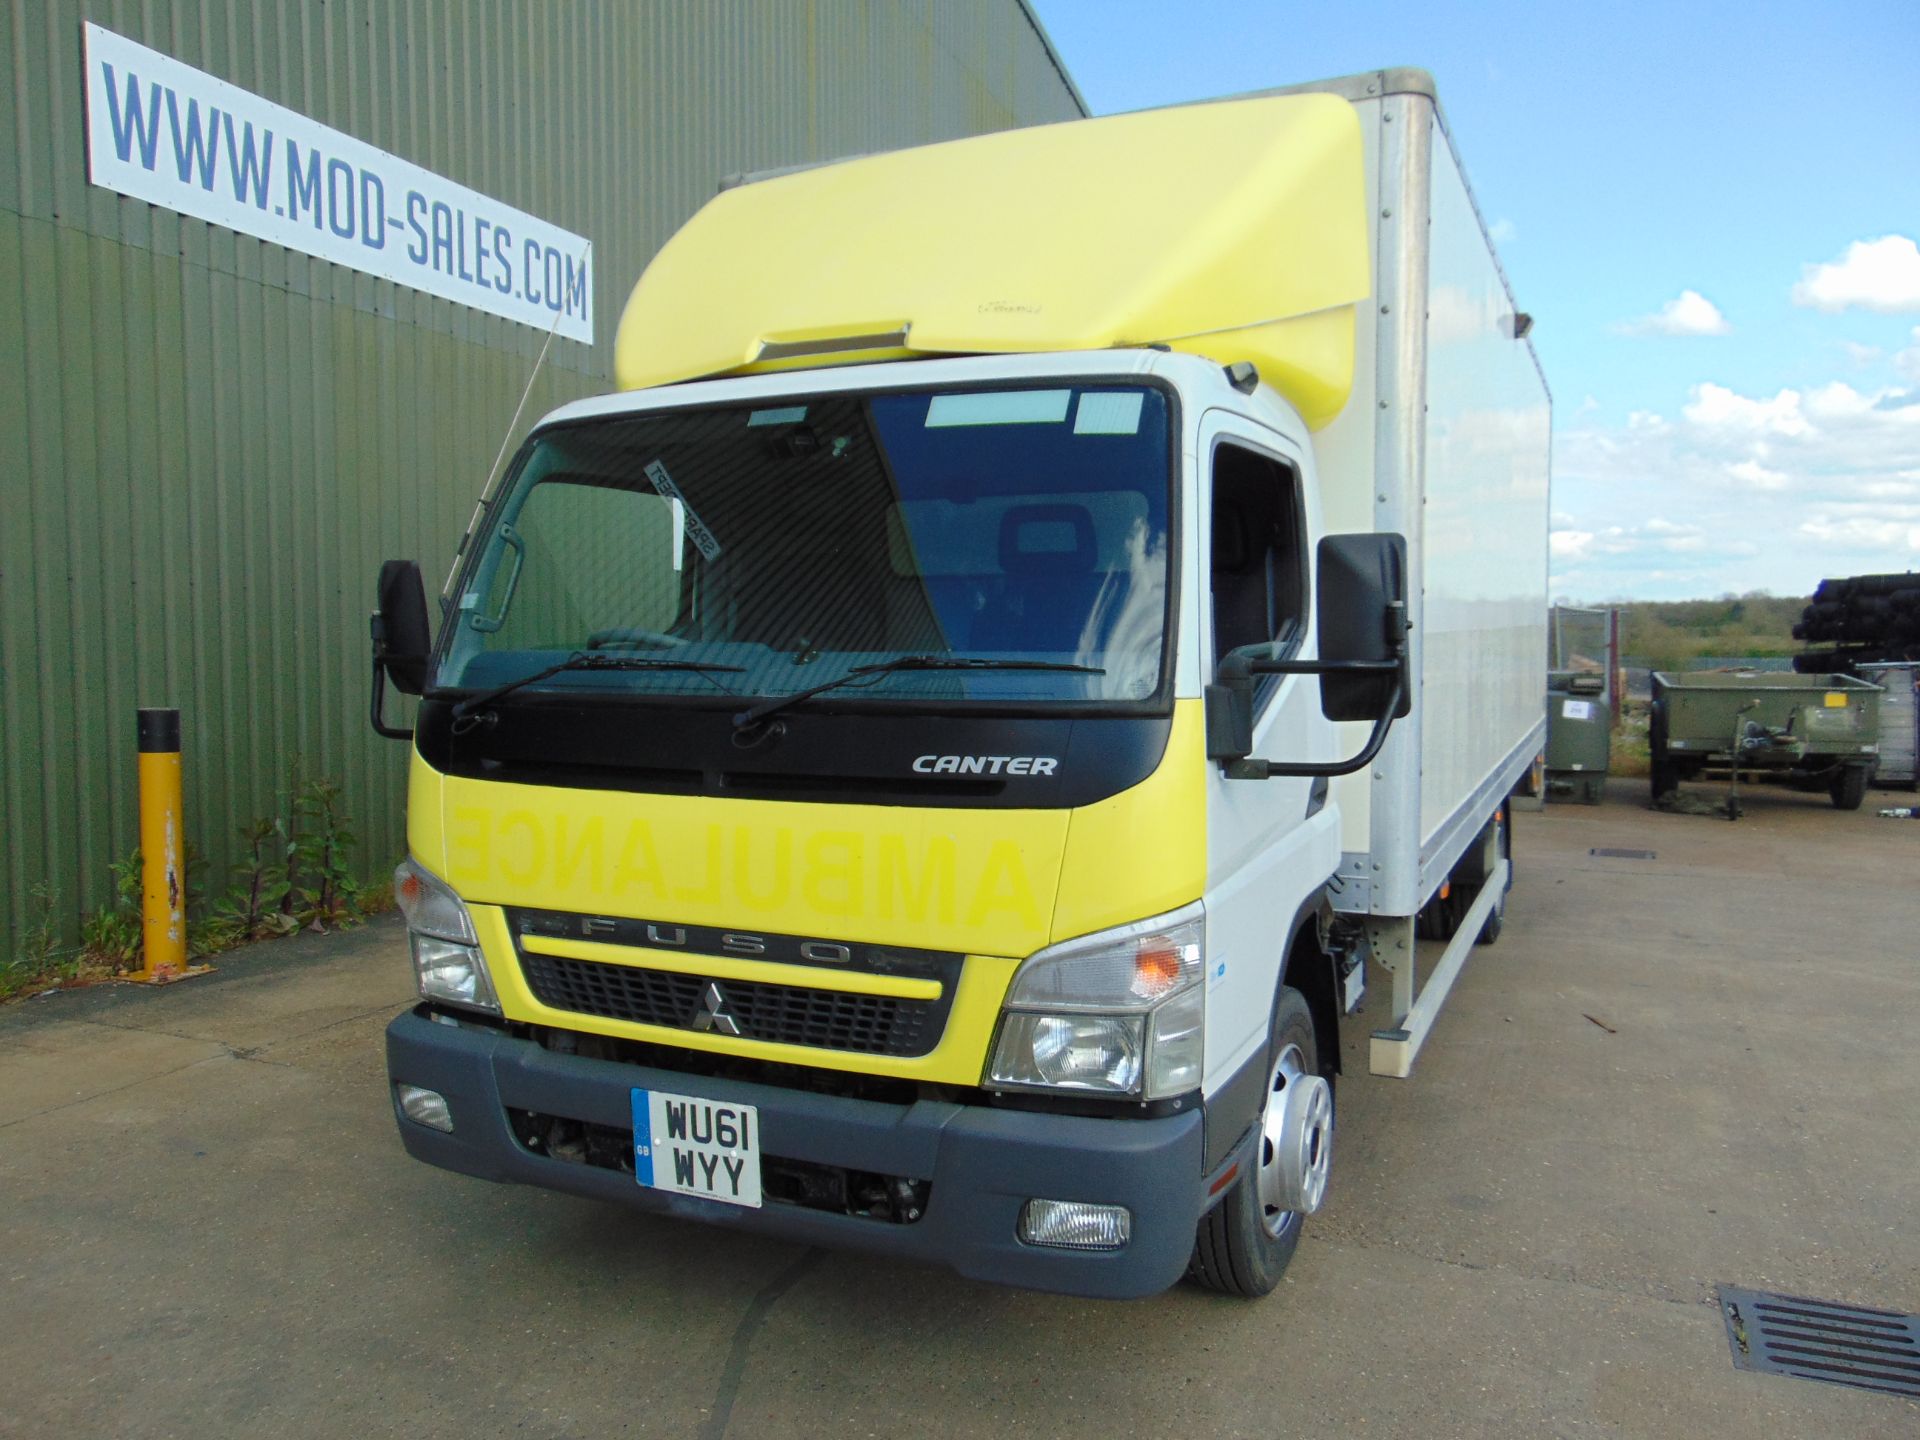 2011 Mitsubishi Fuso Canter Box lorry 7.5T - Only 5400 Miles! - Image 3 of 51